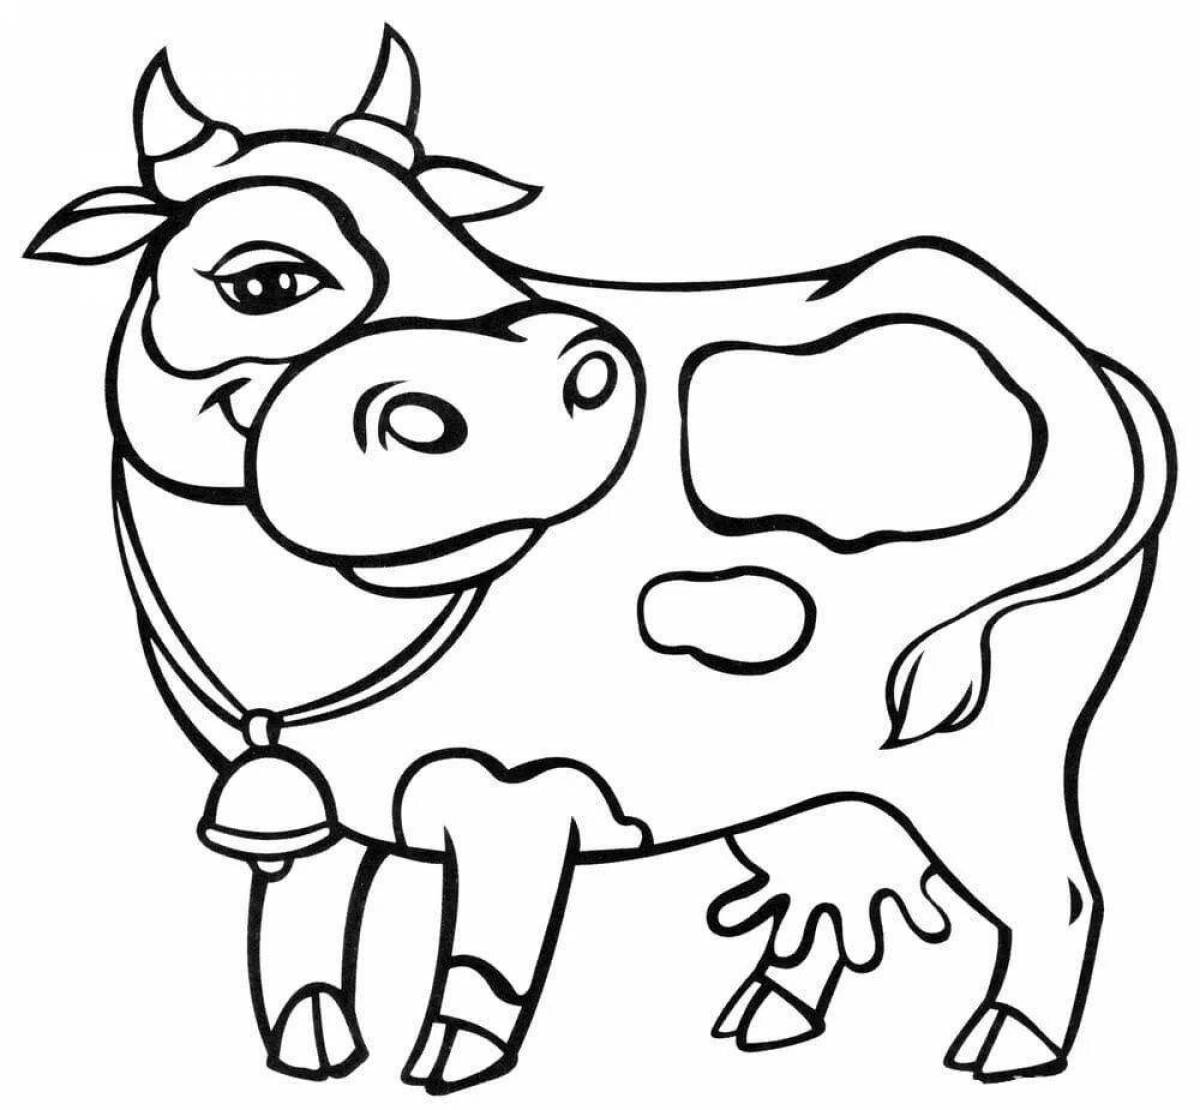 A funny cow coloring book for kids